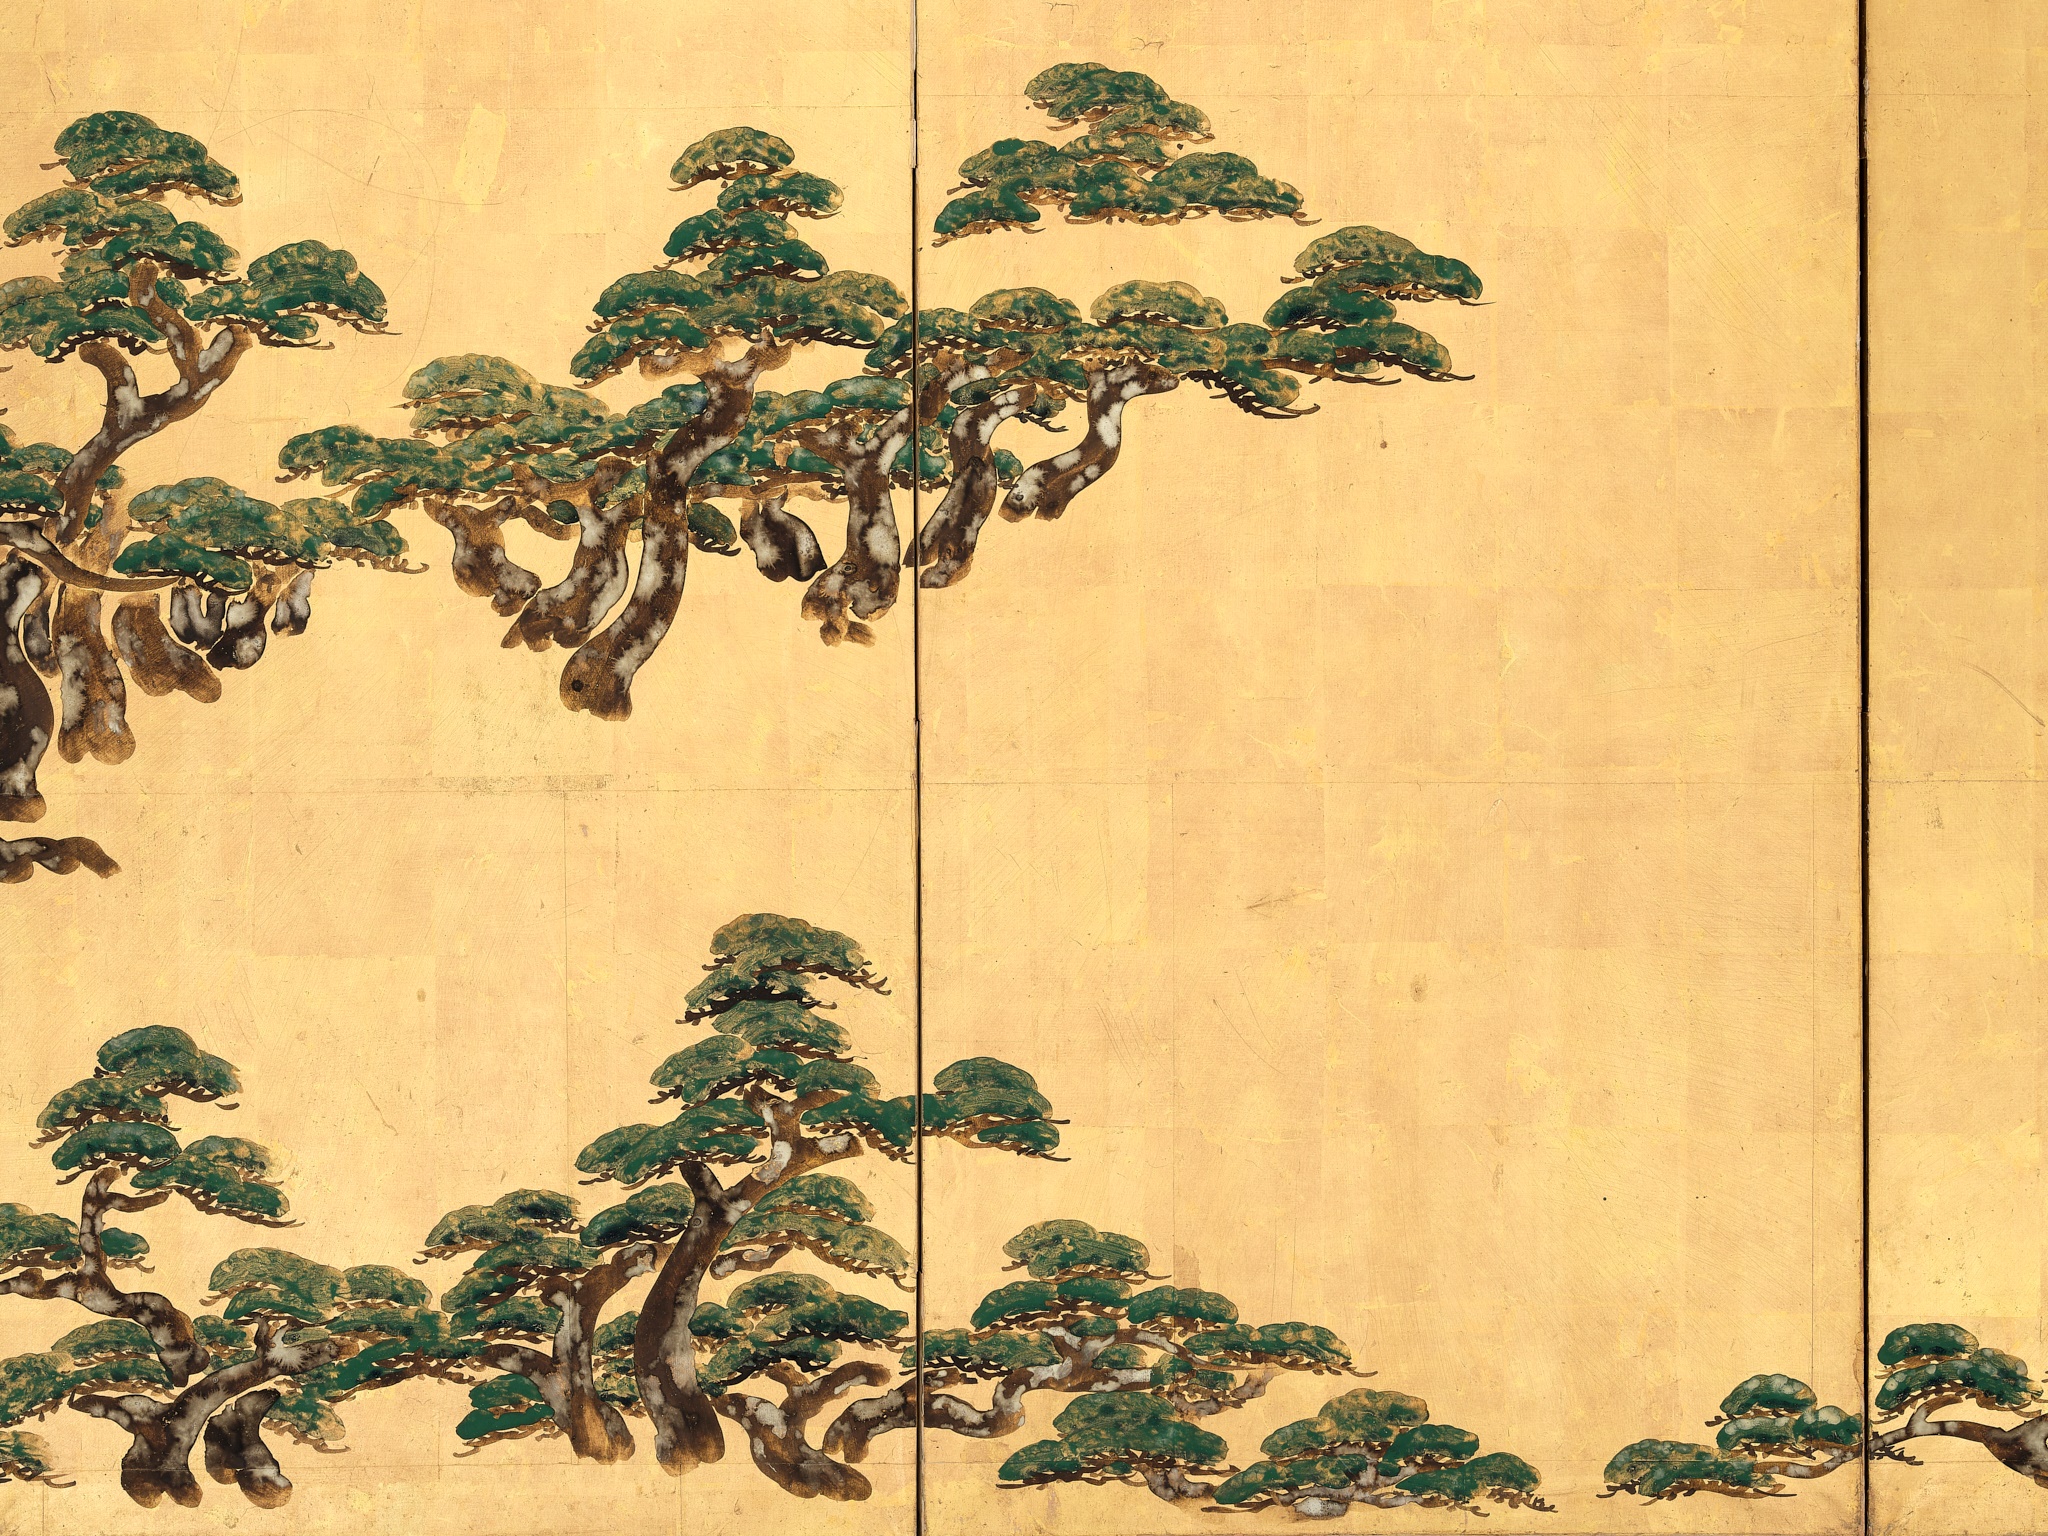 A FINE SIX-PANEL BYOBU SCREEN DEPICTING SNOW COVERED PINES - Image 4 of 4